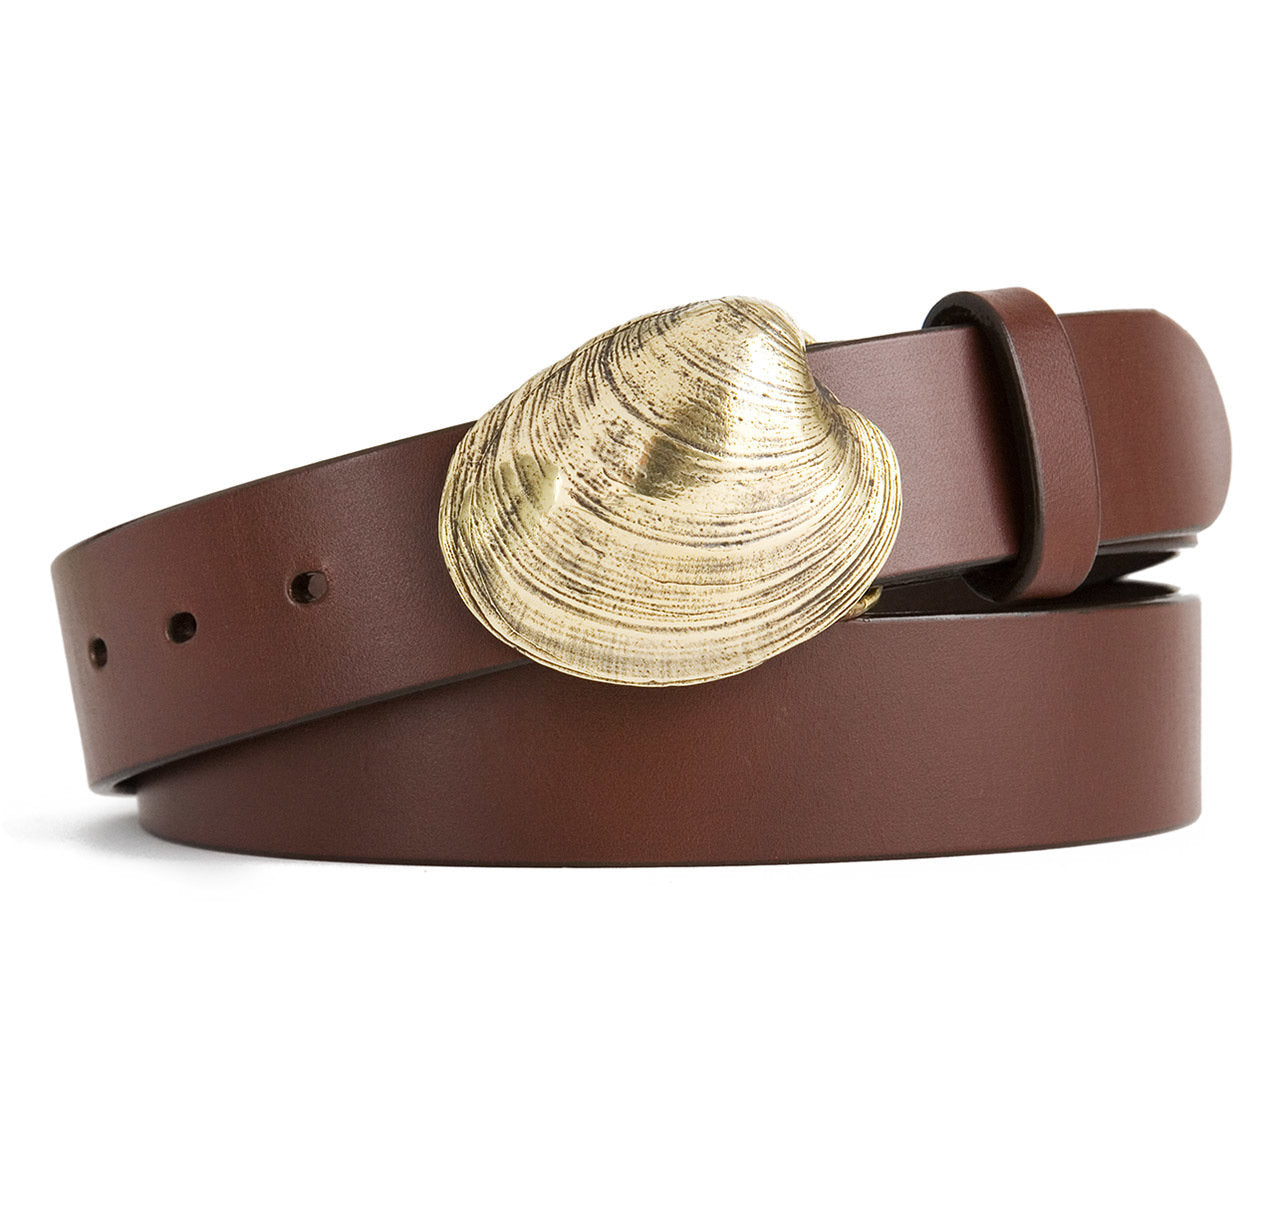 Quahog Shell Buckle with Brown Leather Belt